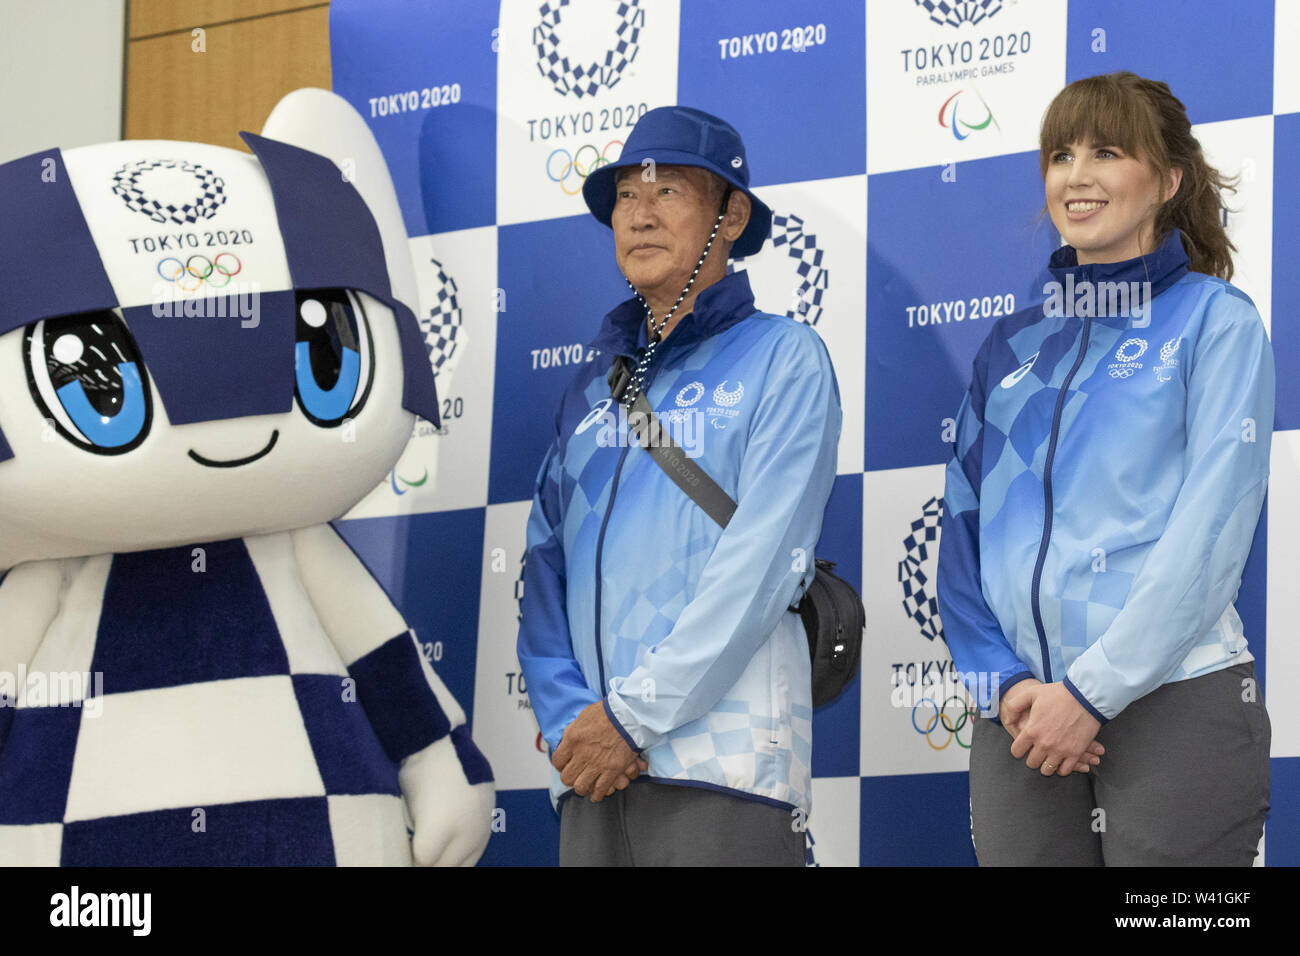 Tokyo, Japan. 19th July, 2019. Game Staff pose for the cameras during a news conference to unveil the Field Cast and City Cast Uniforms for the Tokyo 2020 Games. Organizers of the Tokyo 2020 Olympic and Paralympic Games (Tokyo 2020) unveiled the uniforms for Games Staff (the Field Staff) and City Volunteers (the City Cast) during the 2020 Games. Credit: Rodrigo Reyes Marin/ZUMA Wire/Alamy Live News Stock Photo